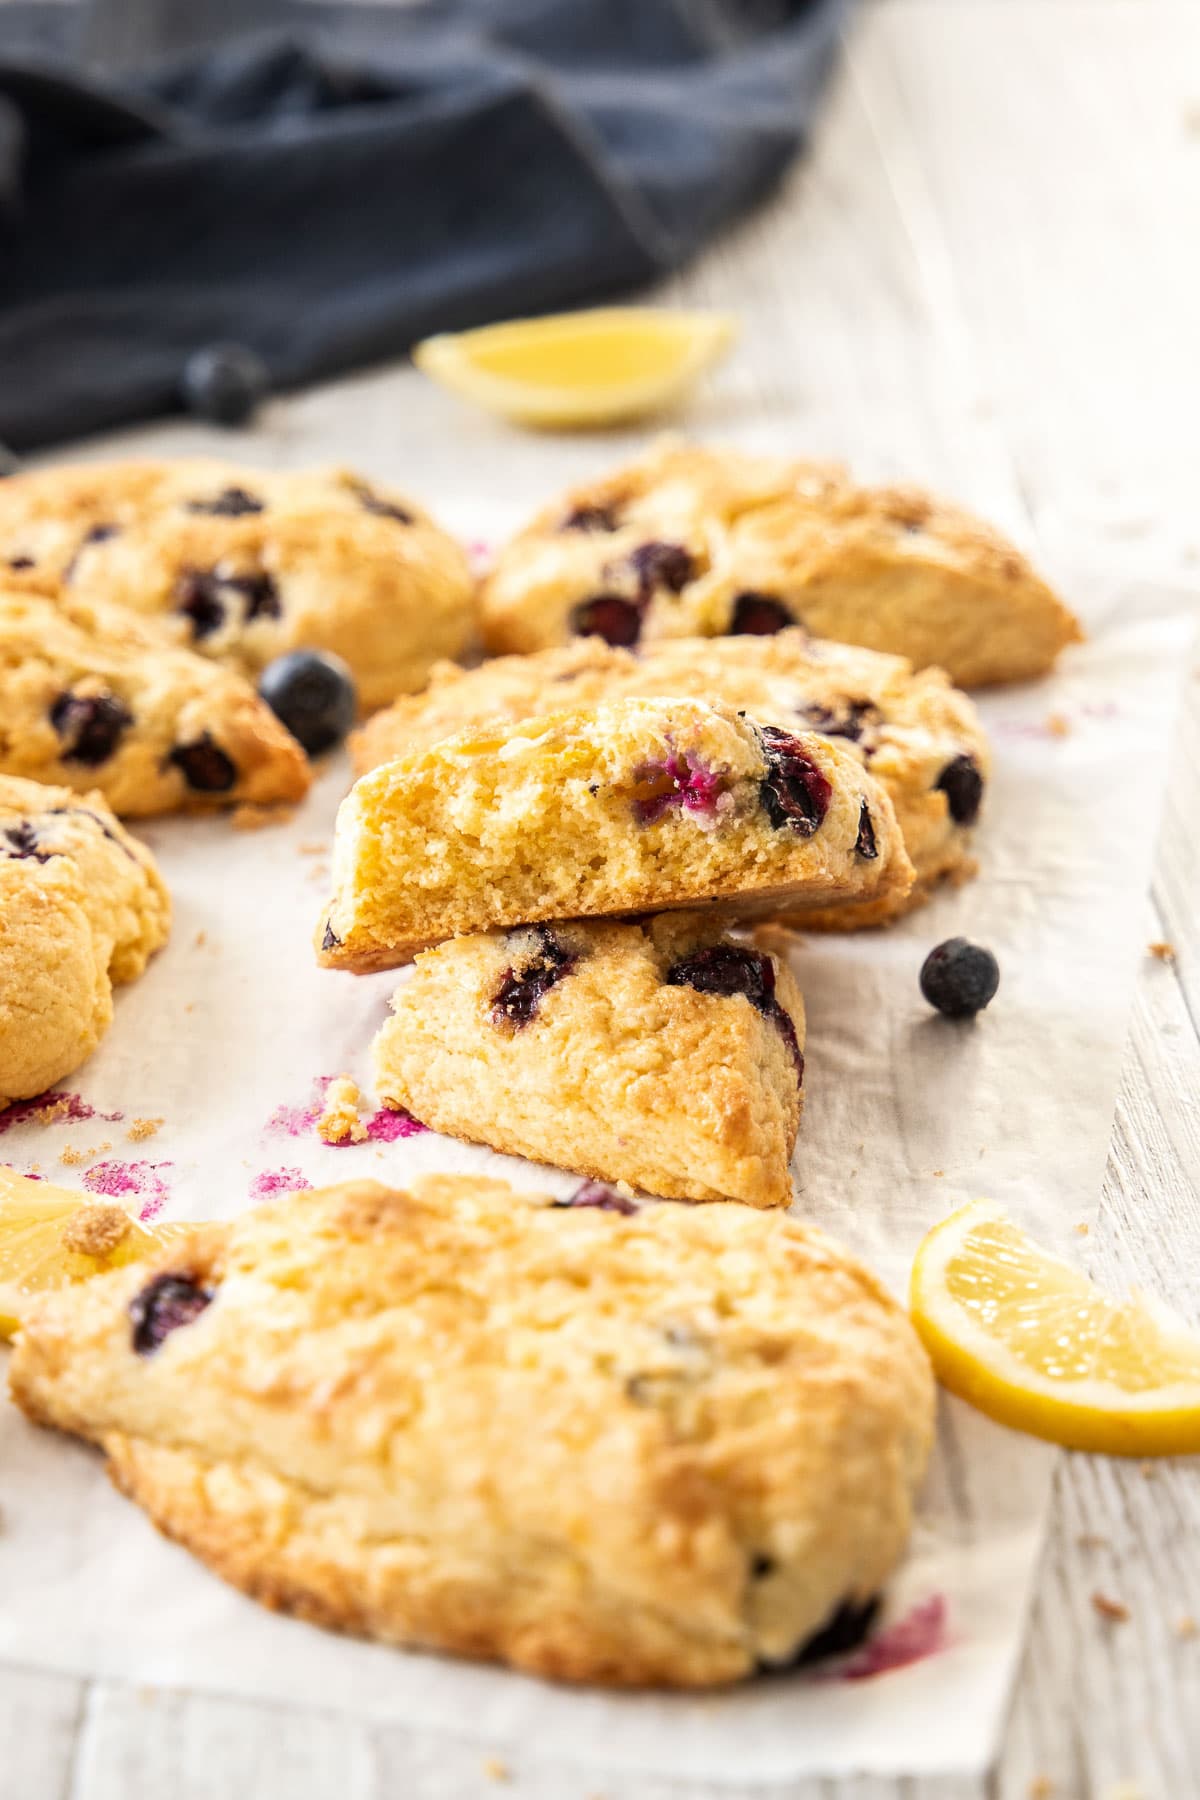 Lemon Blueberry scones on a table top with the centre scone missing a large bite.